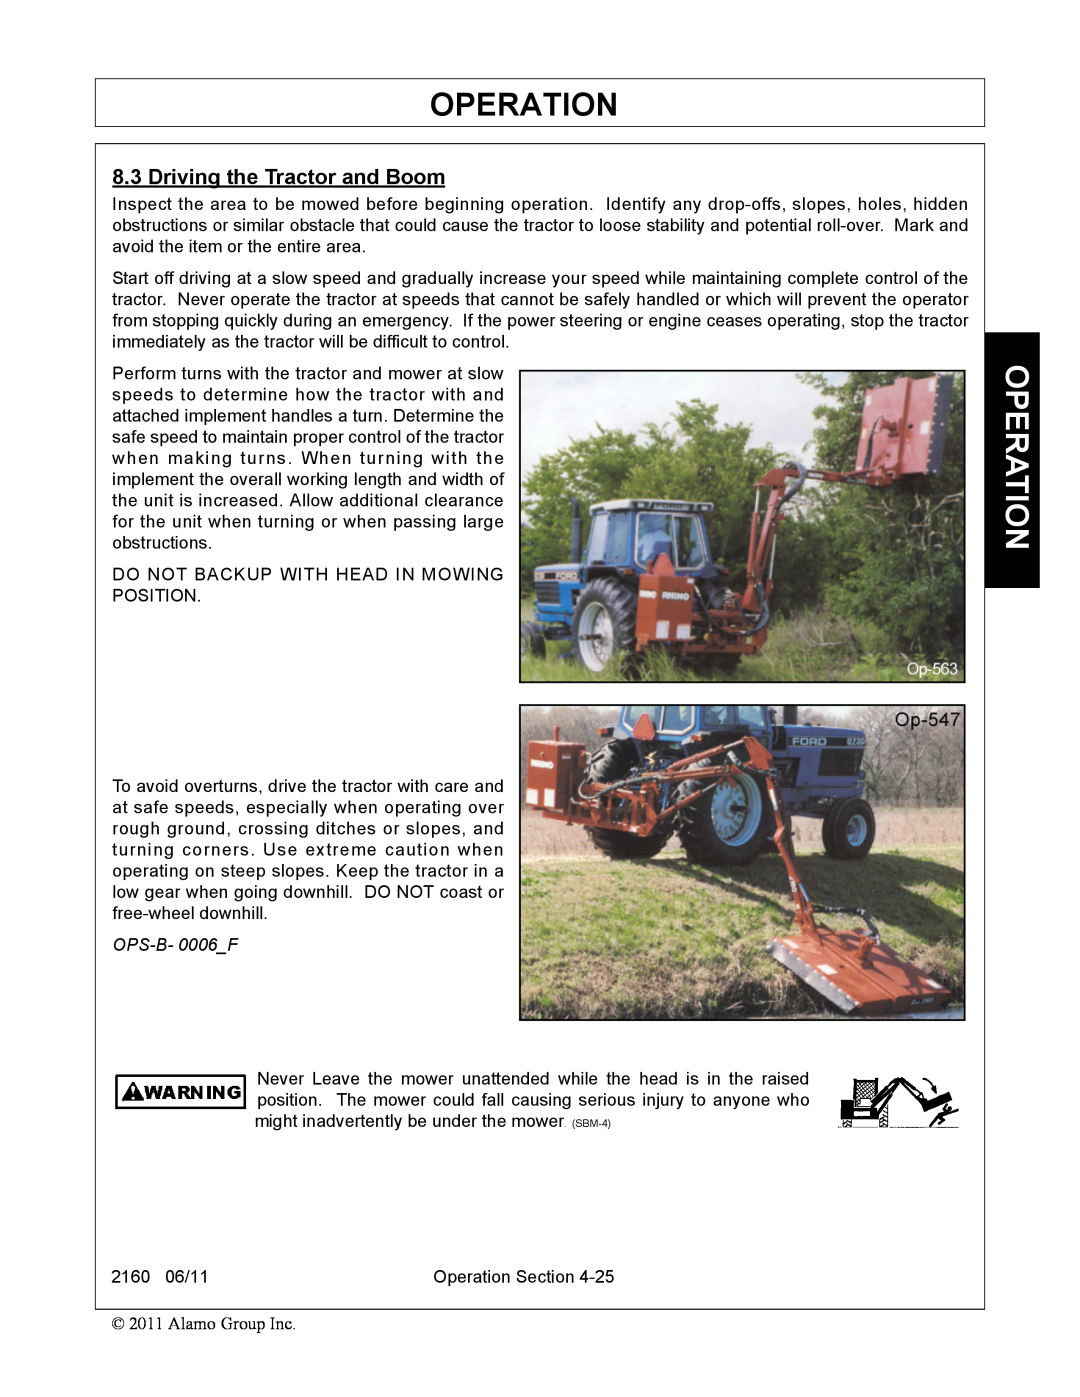 Servis-Rhino 2160 manual Operation, Driving the Tractor and Boom, OPS-B- 0006F 